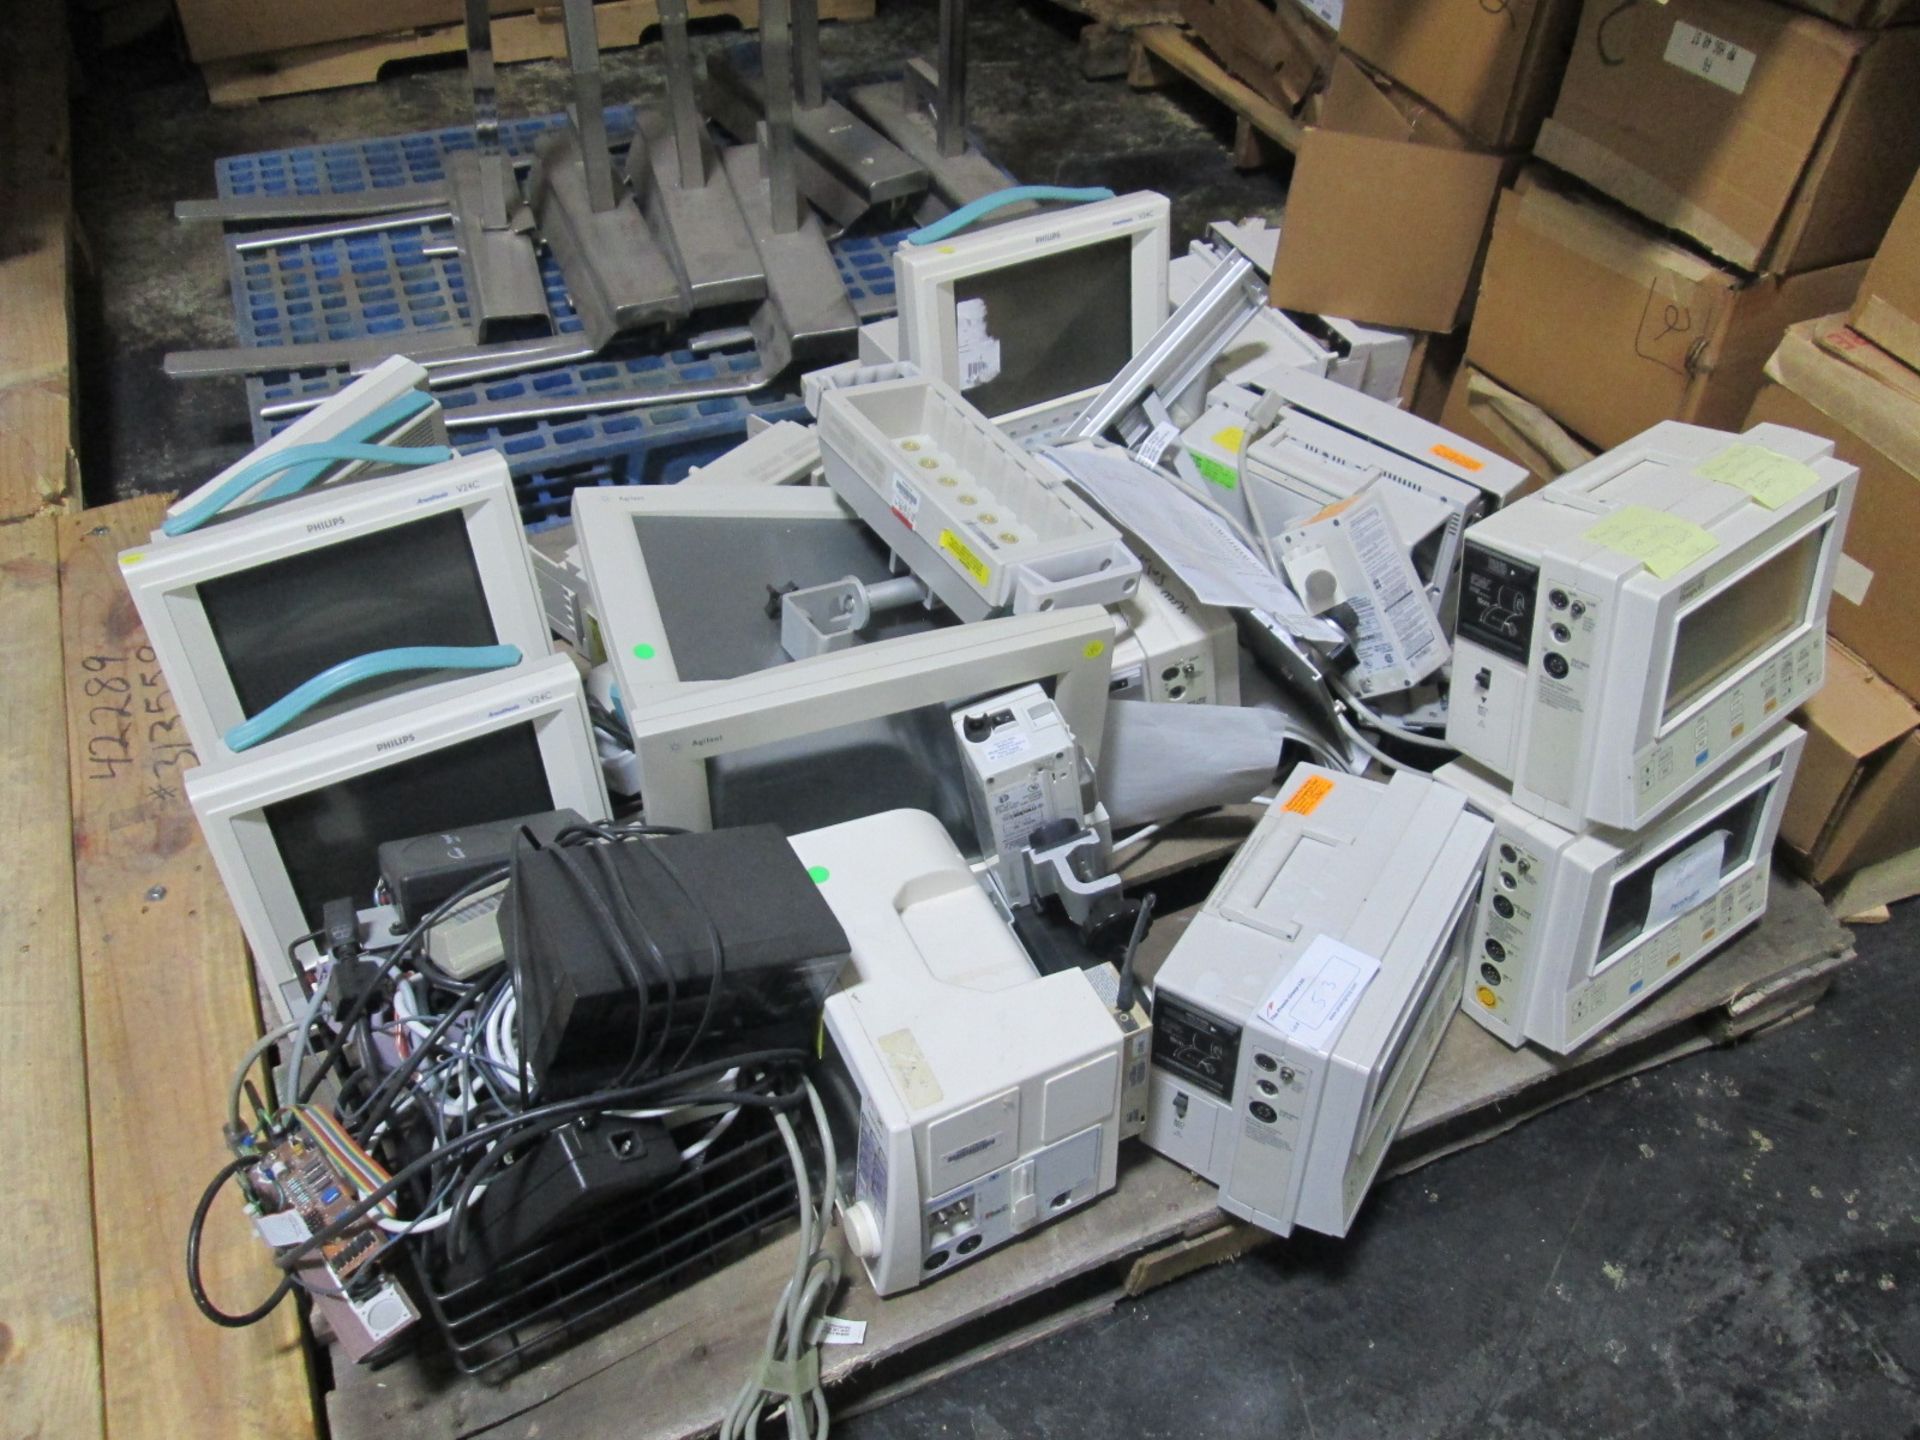 Lot of Assorted Medical Scanners, monitors, Instruments, Printers and Computers.. AS Seen in images - Image 11 of 26